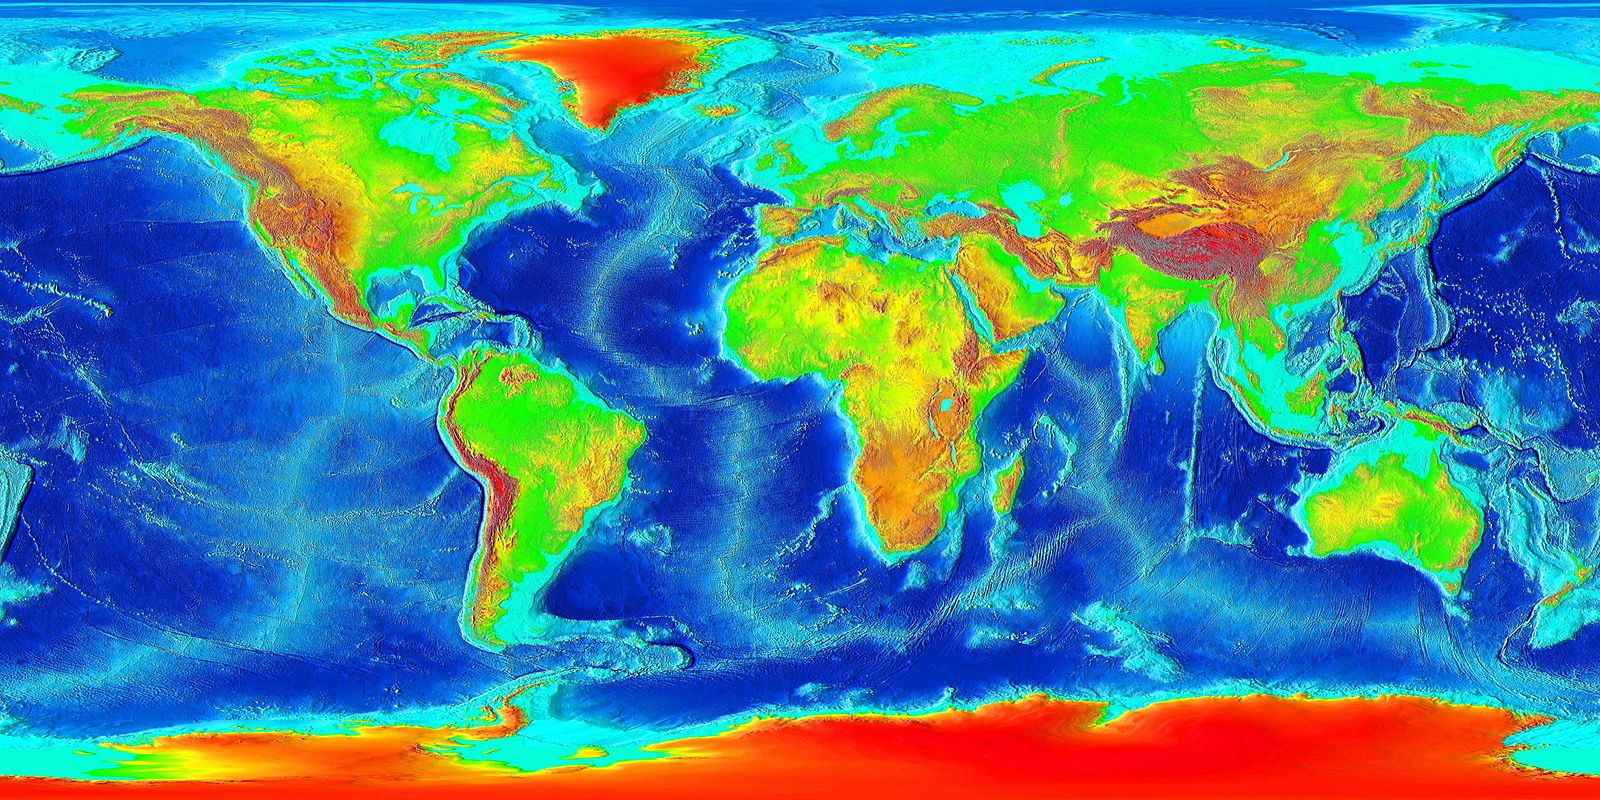 World map color-coded by elevation. The ocean basins are dark blue except for the mid-ocean ridges and ocean margins which are light blue. The continents are green at low elevations and red to brown at higher elevations.